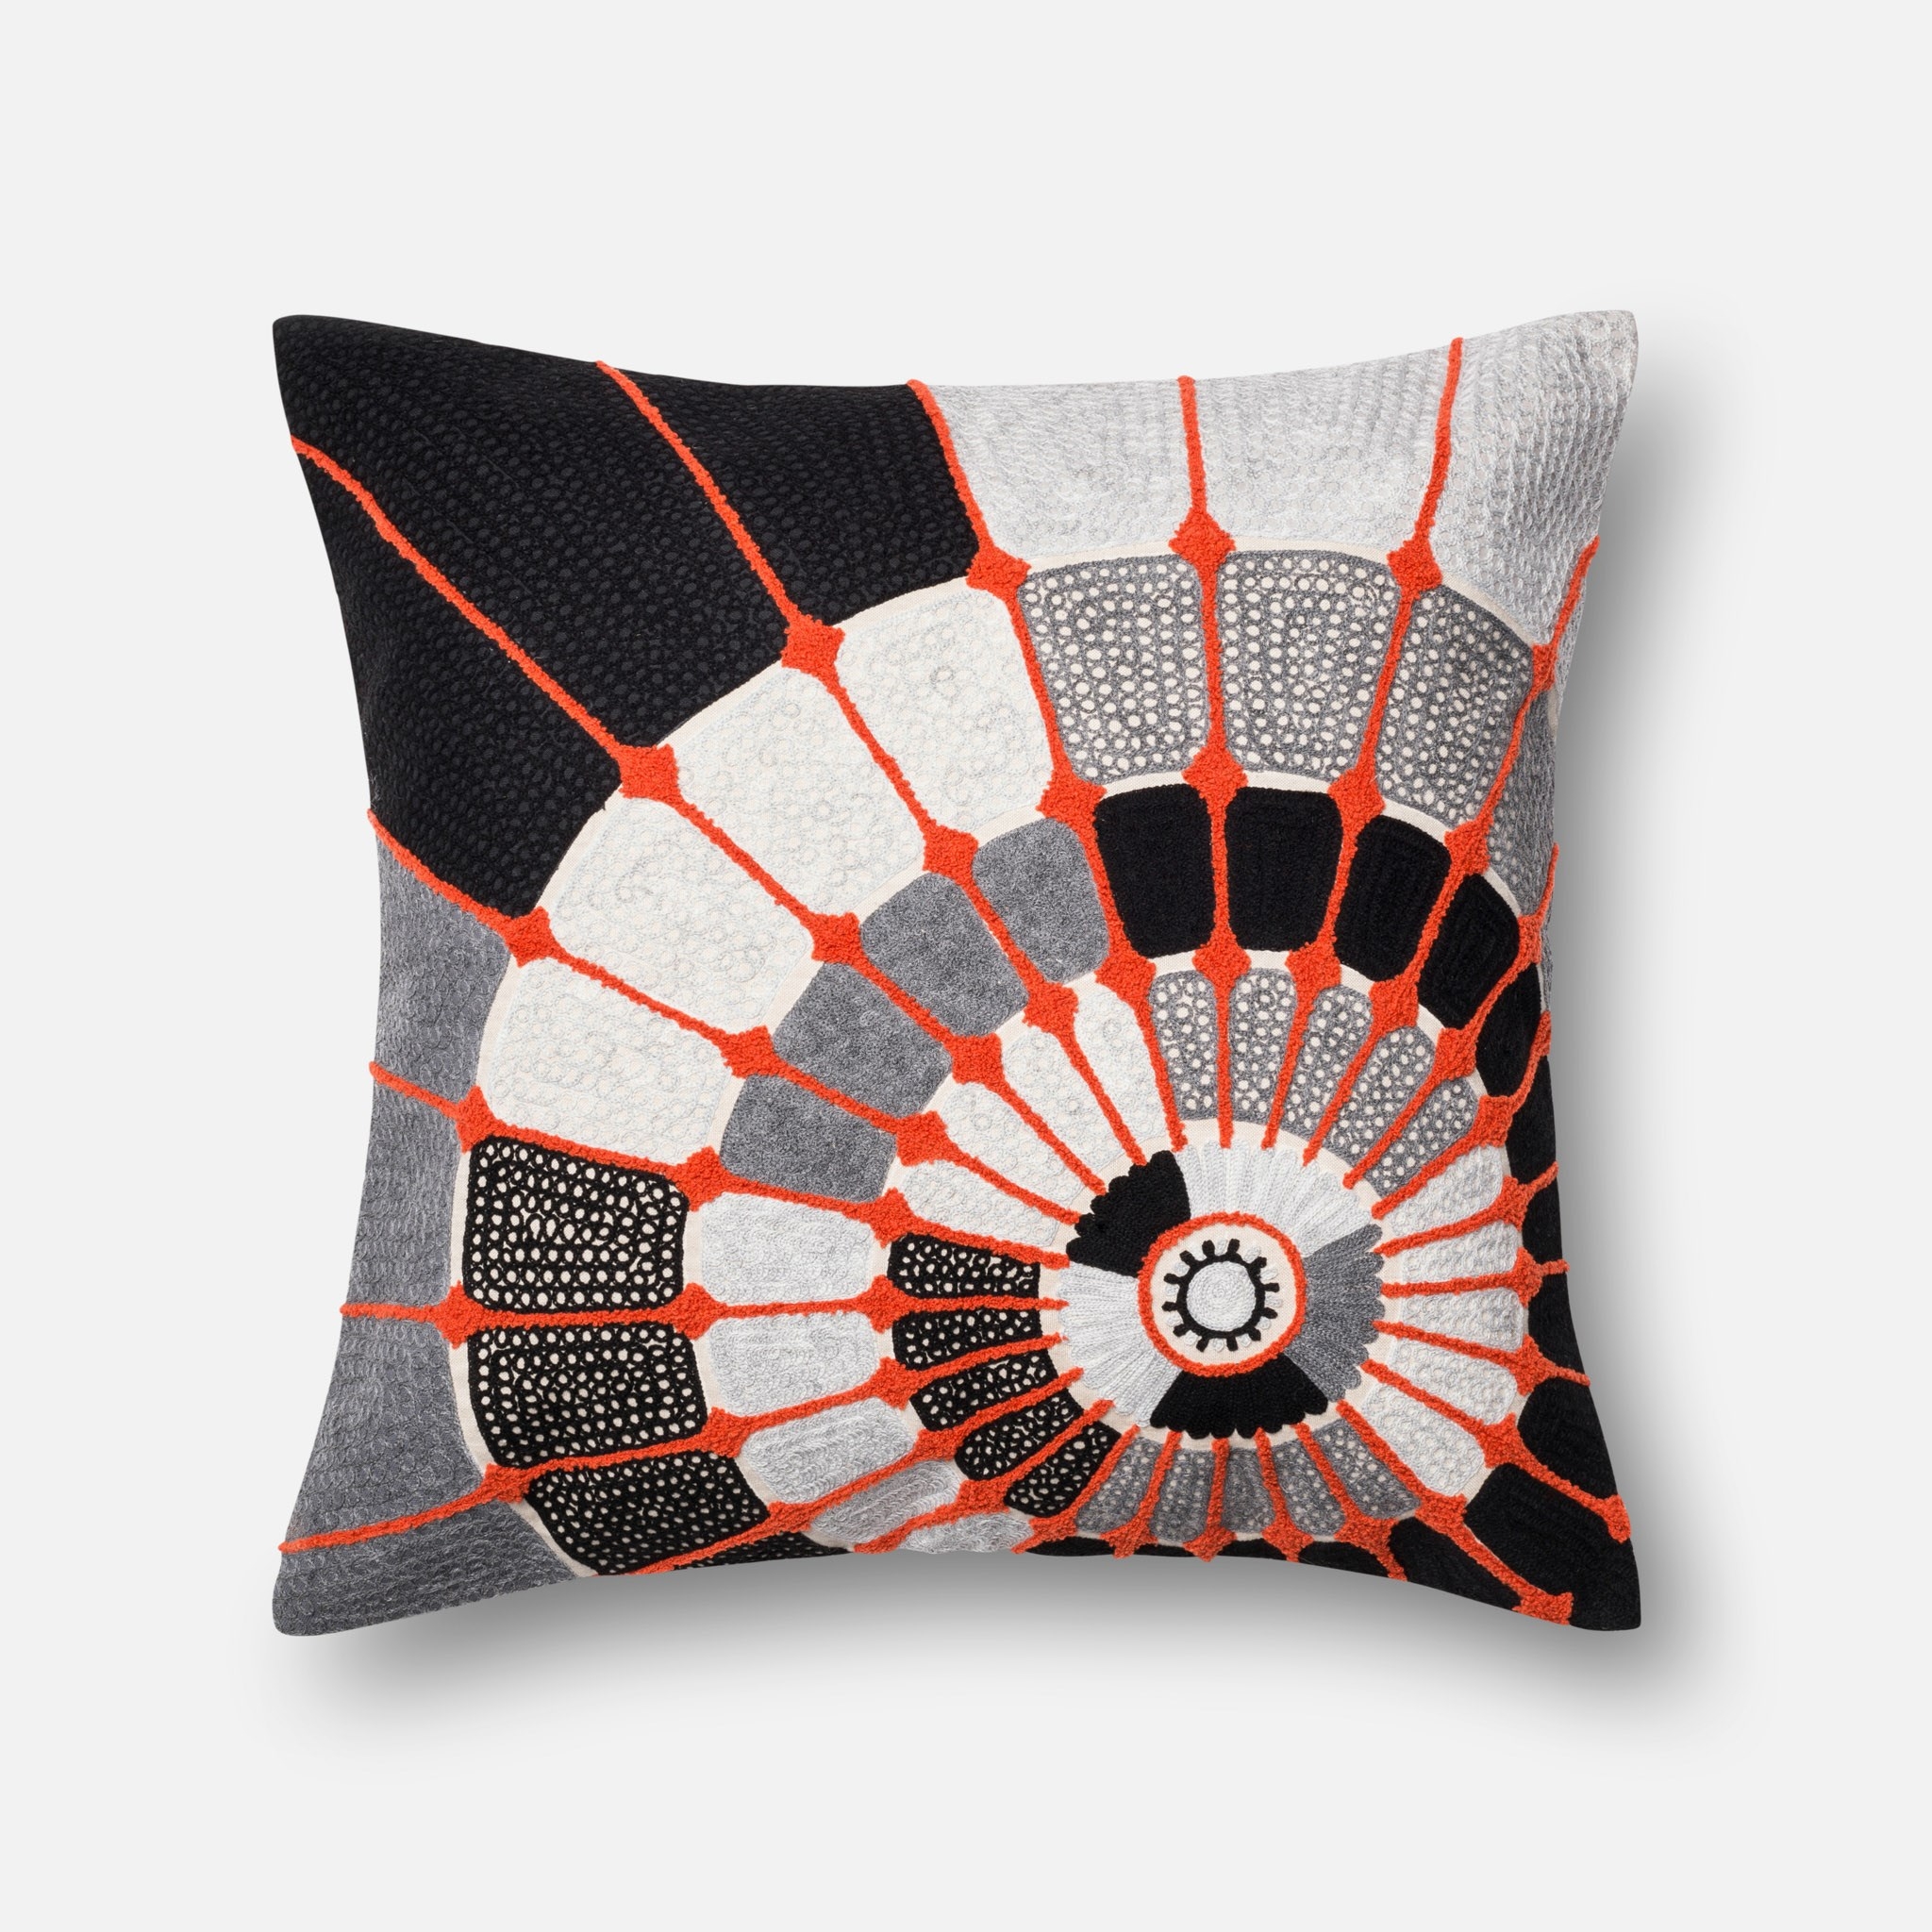 PILLOWS - GREY / ORANGE - 22" X 22" Cover Only - Image 0